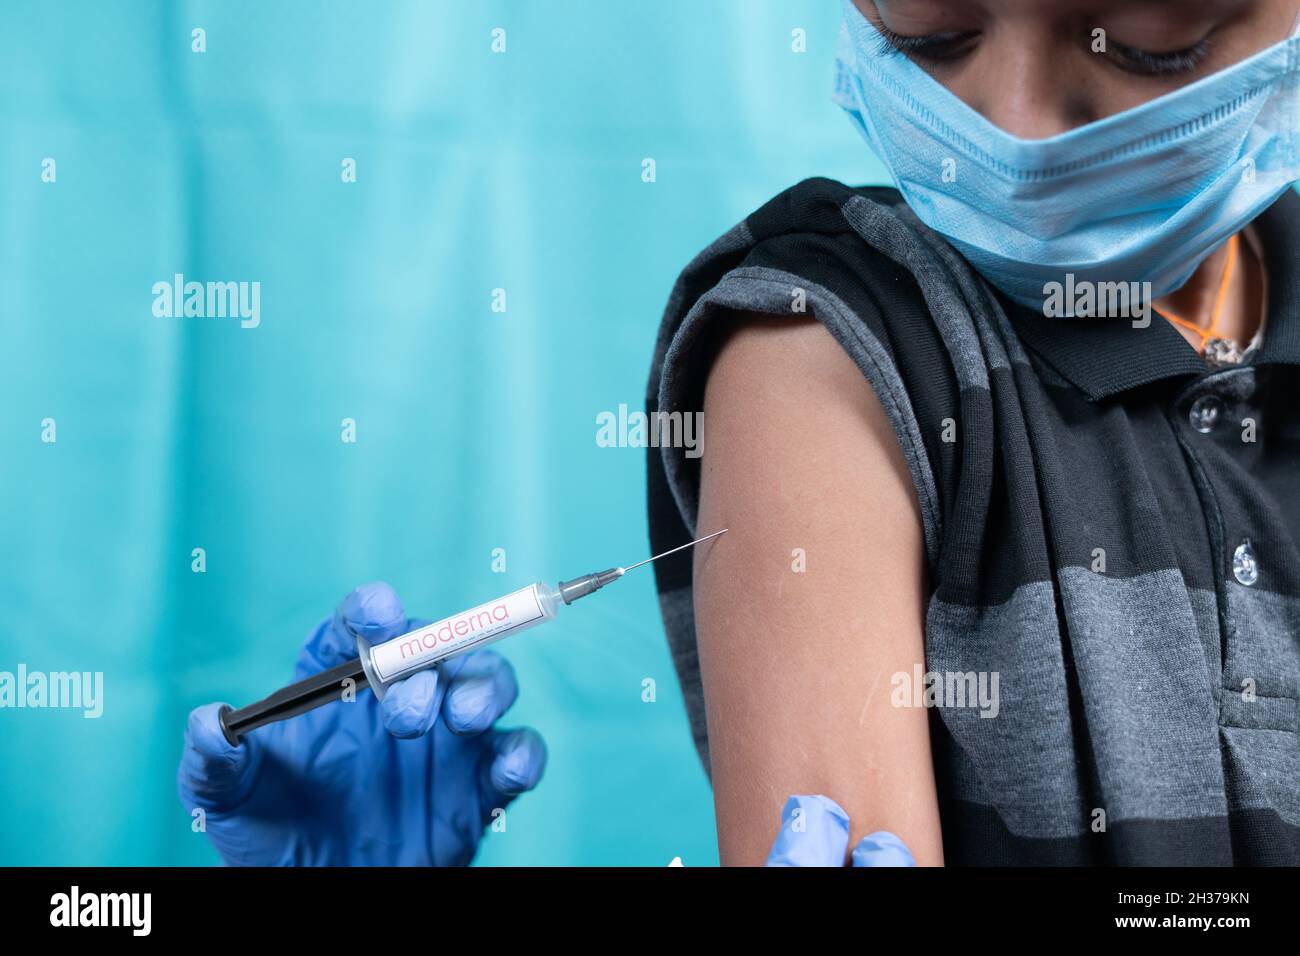 Maski, India - October 26, 2021 : Young kid with medical face mask getting vaccinated Moderna Covid-19 or coronavirus children vaccine. Stock Photo